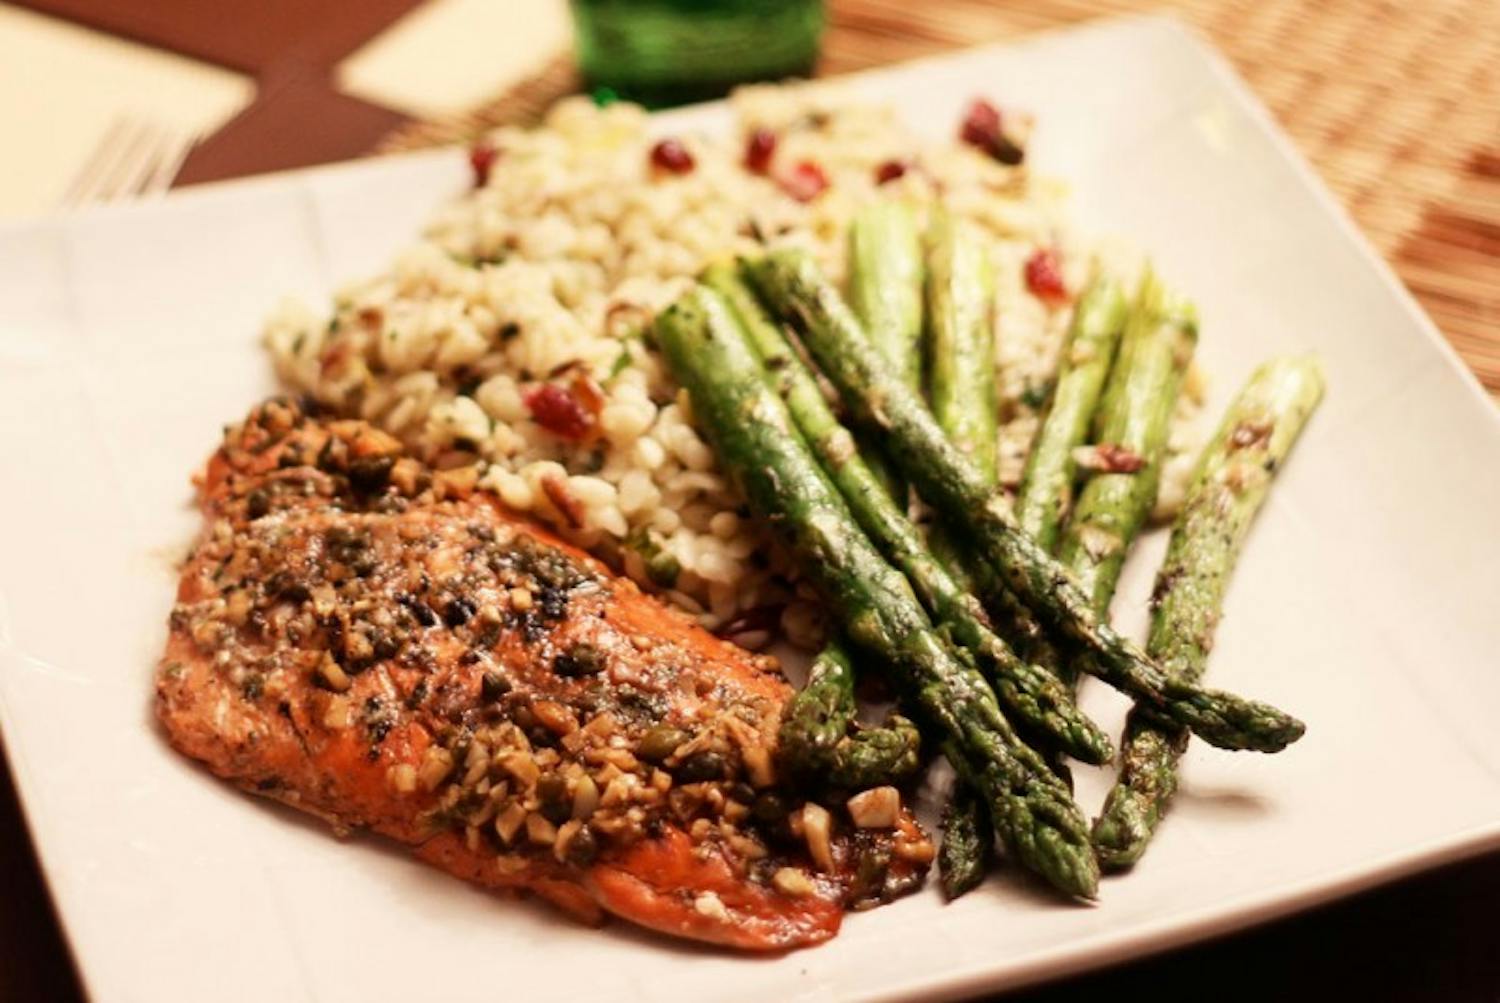 What's in the fridge: Mediterranean style salmon with orzo and asparagus